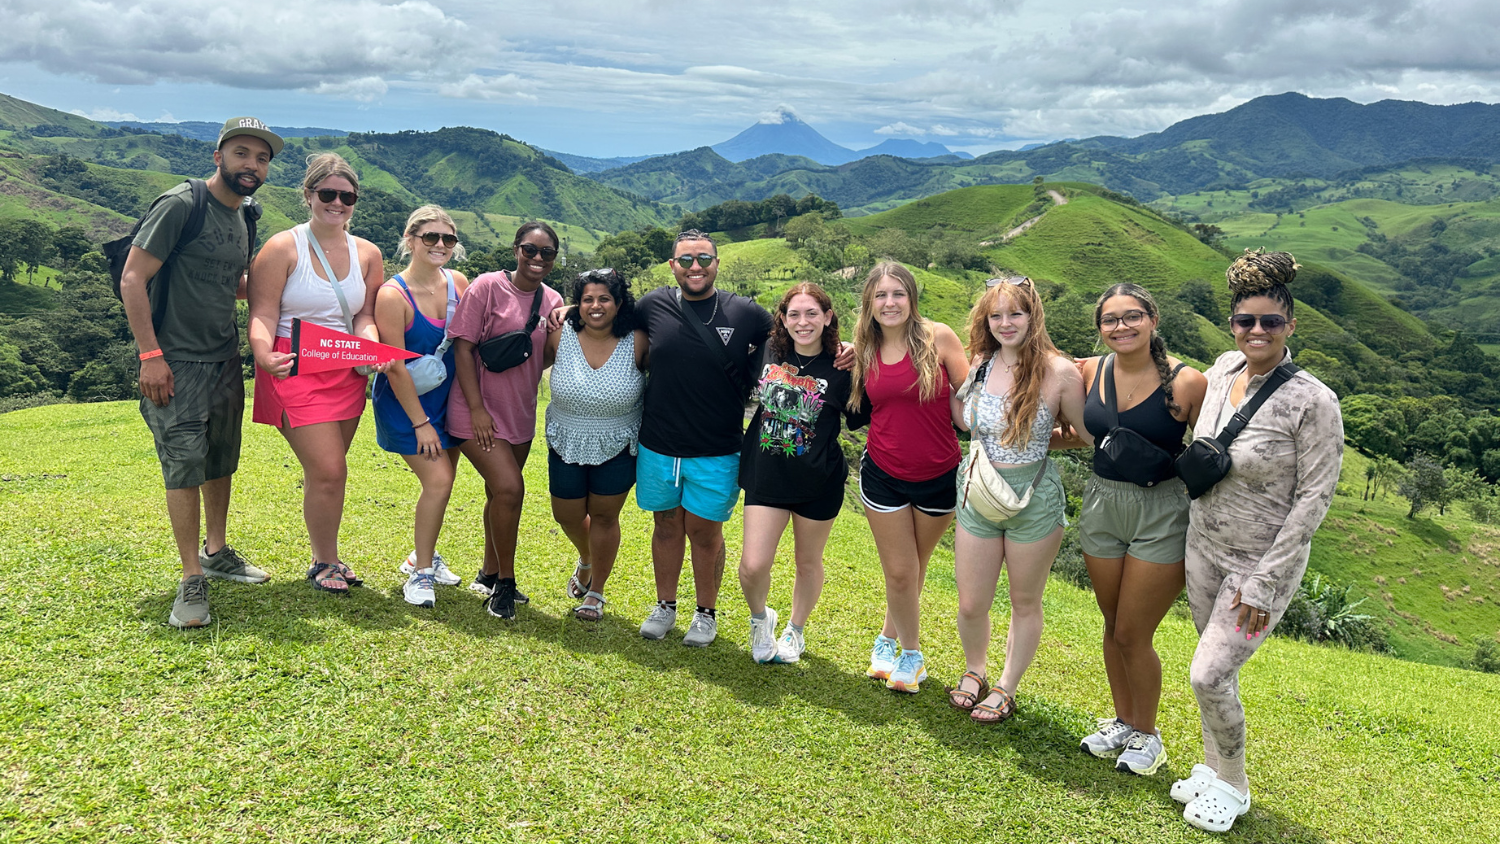 A group photo of the Transformational Scholars standing in front of a scenic vista overlooking mountains that are thick with vegetation.